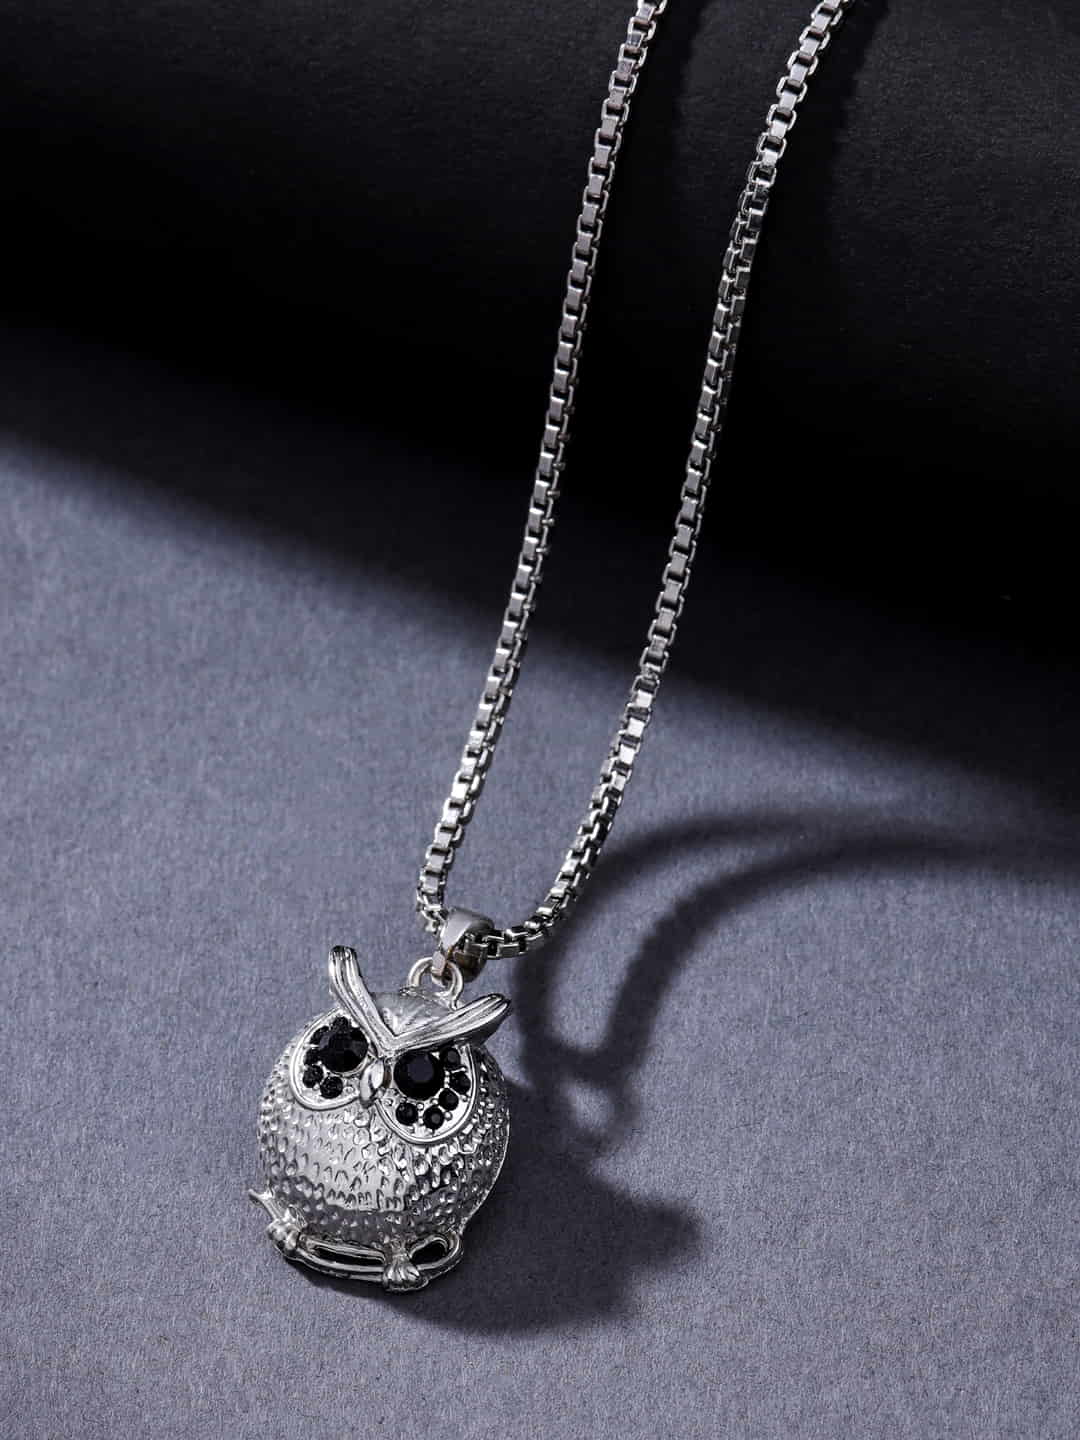 Owl Pendant Necklace - Silver Plated